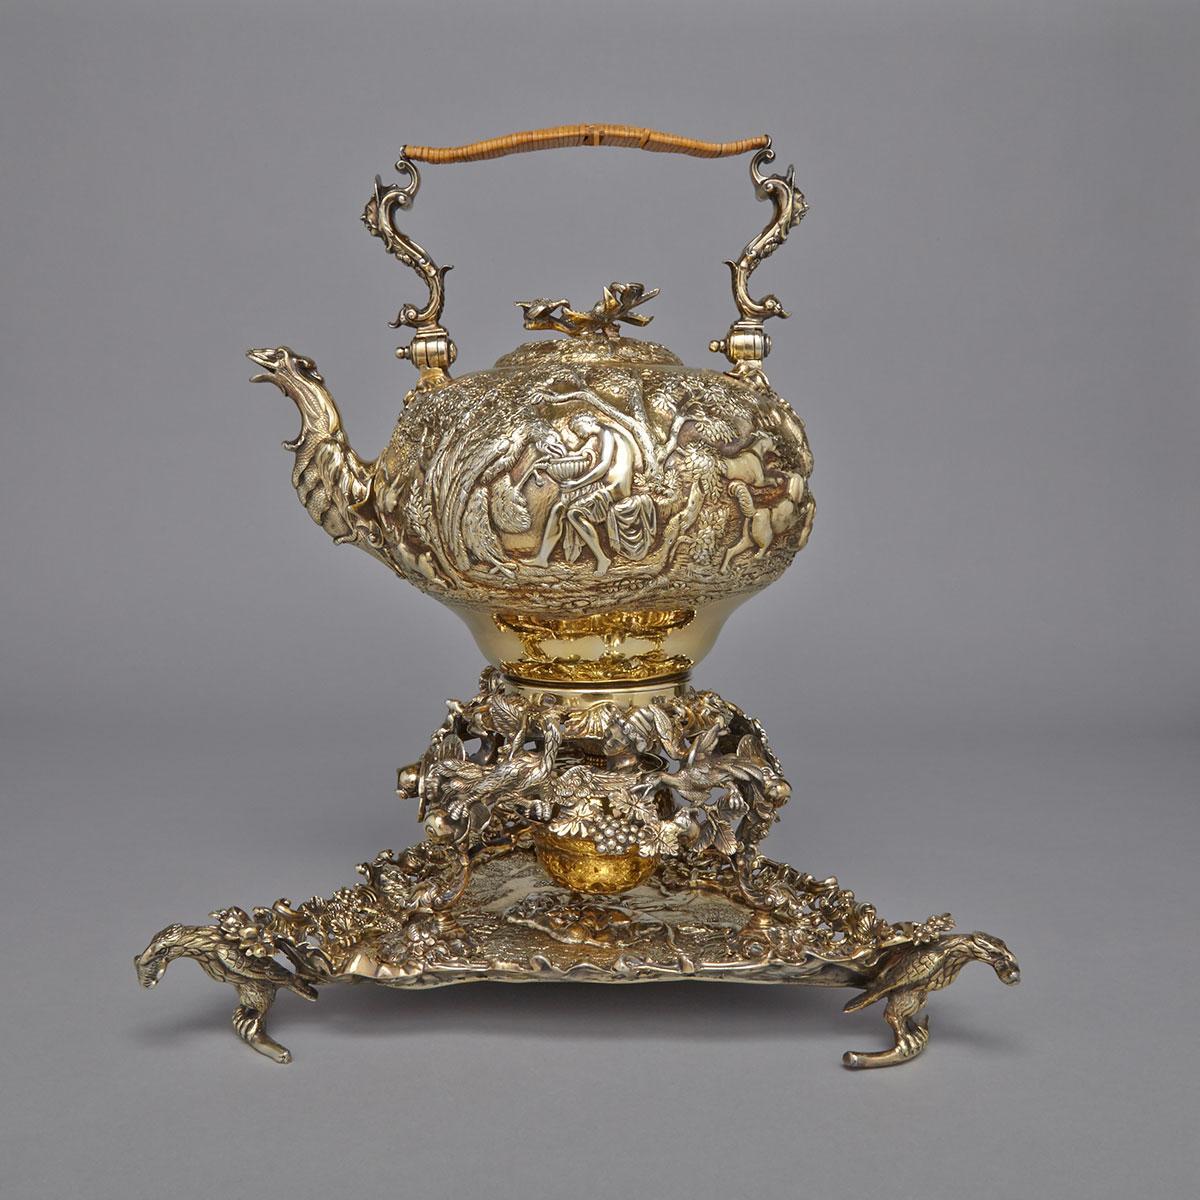 George III Silver-Gilt Tea Kettle on Lampstand with Tray, Edward Farrell, London, 1817